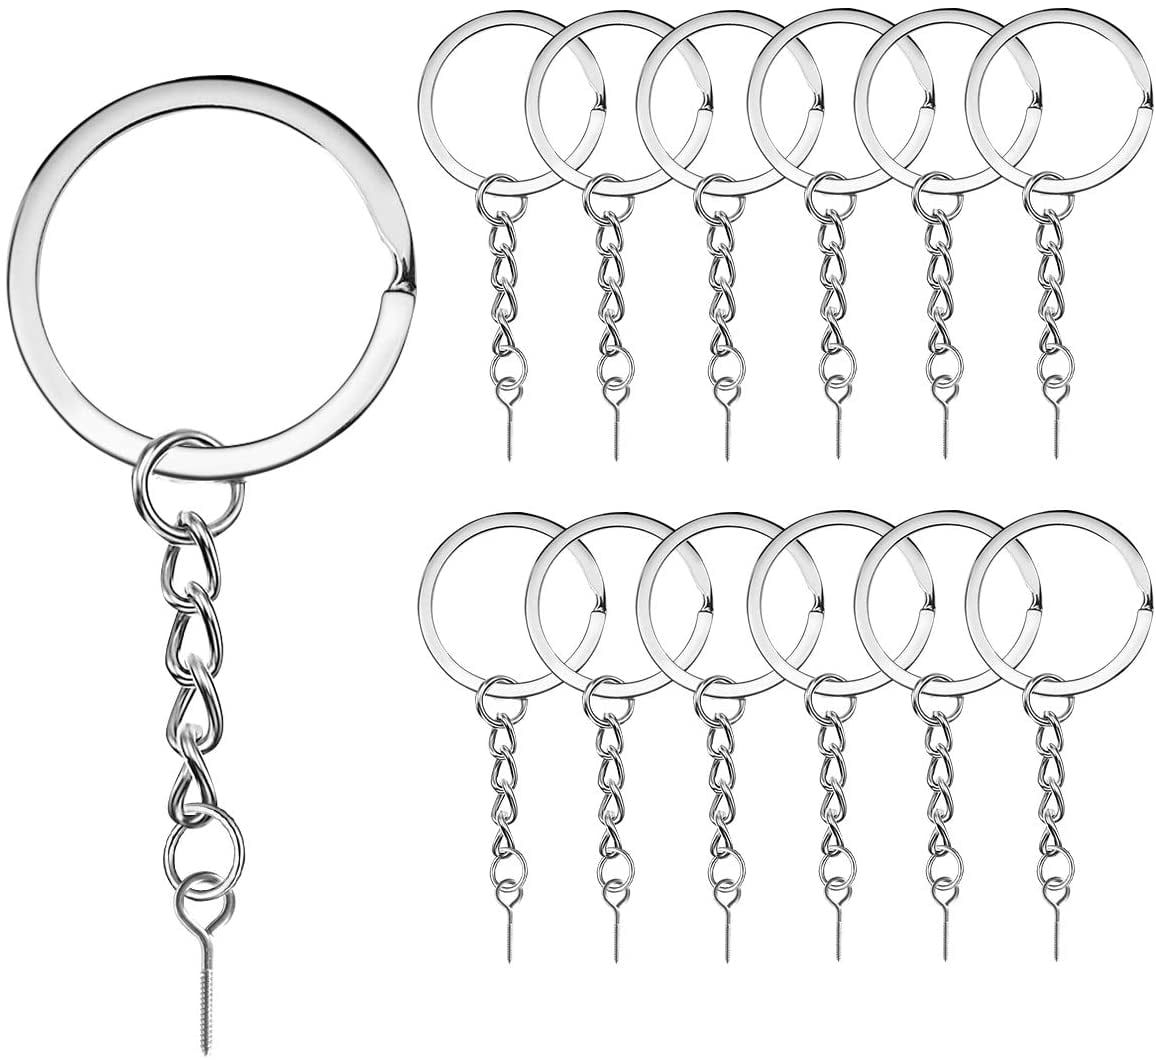 6/5 Inch Swpeet 300Pcs Bronze Key Chain Rings Kit 4/5 Inch 1 Inch 100Pcs Keychain Rings with Chain and 100Pcs Jump Ring with 100Pcs Screw Eye Pins Bulk for Jewelry Findings Making 3/5 Inch 